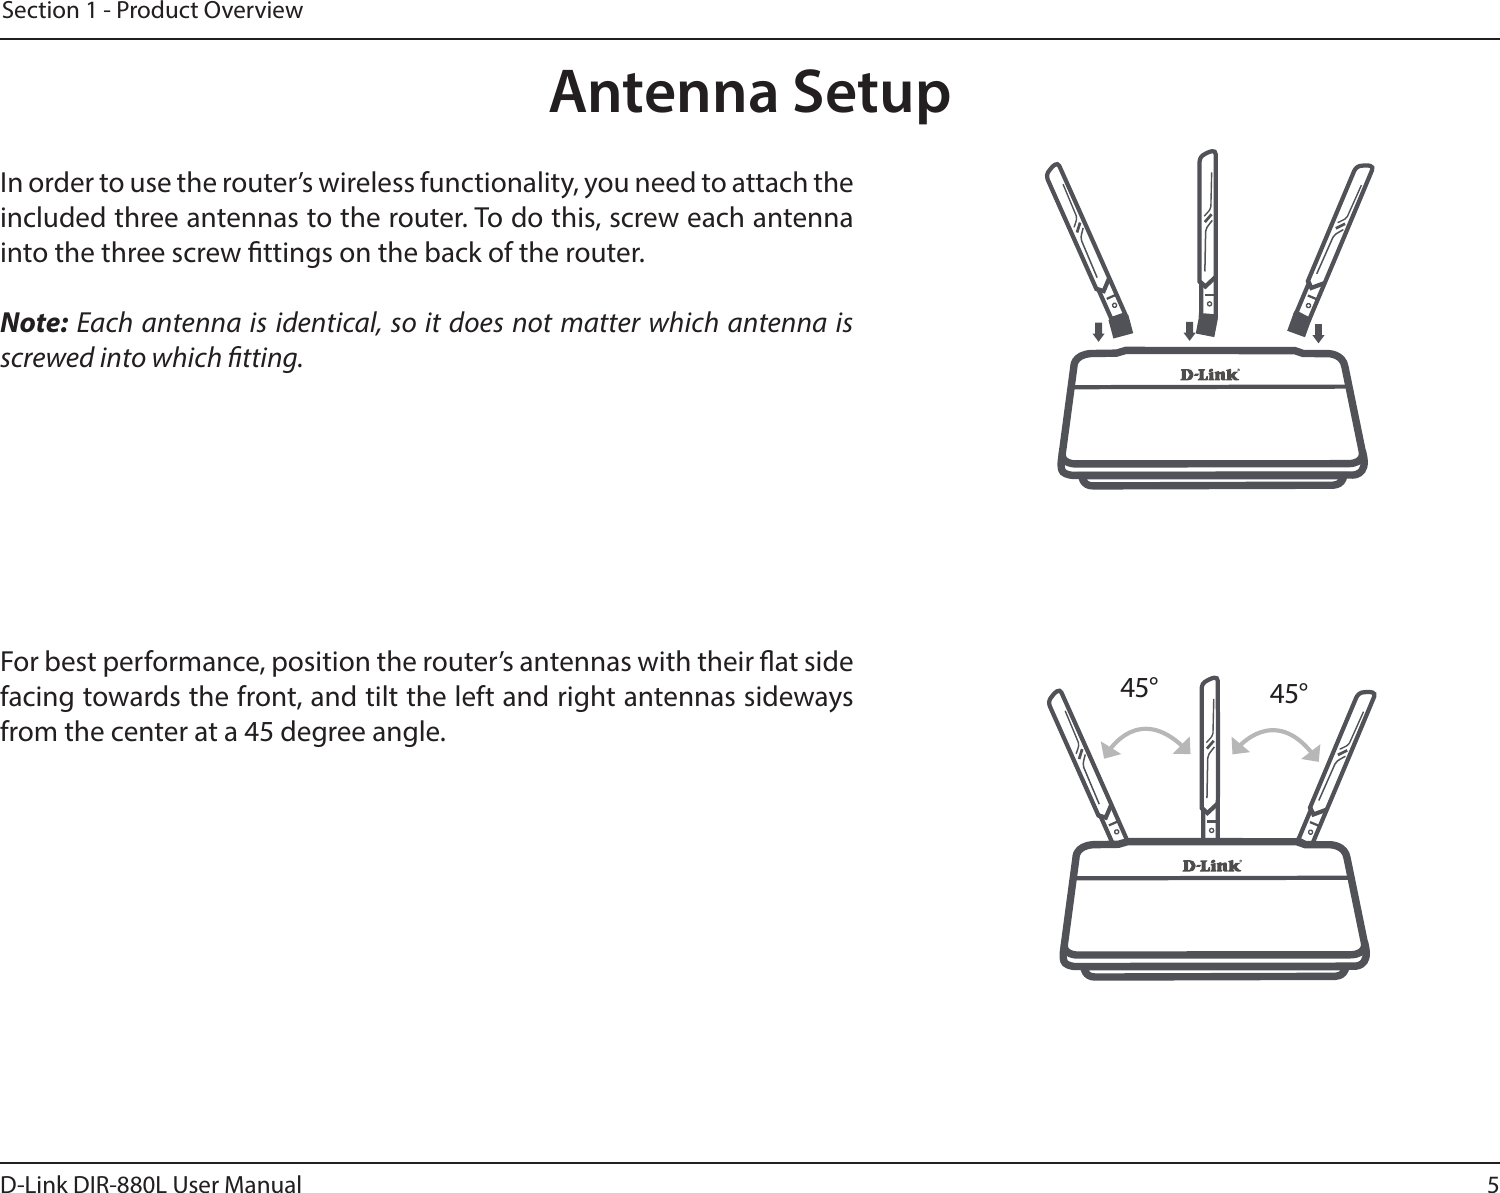 5D-Link DIR-880L User ManualSection 1 - Product OverviewAntenna SetupIn order to use the router’s wireless functionality, you need to attach the included three antennas to the router. To do this, screw each antenna into the three screw ttings on the back of the router.Note: Each antenna is identical, so it does not matter which antenna is screwed into which tting.For best performance, position the router’s antennas with their at side facing towards the front, and tilt the left and right antennas sideways from the center at a 45 degree angle.45° 45°